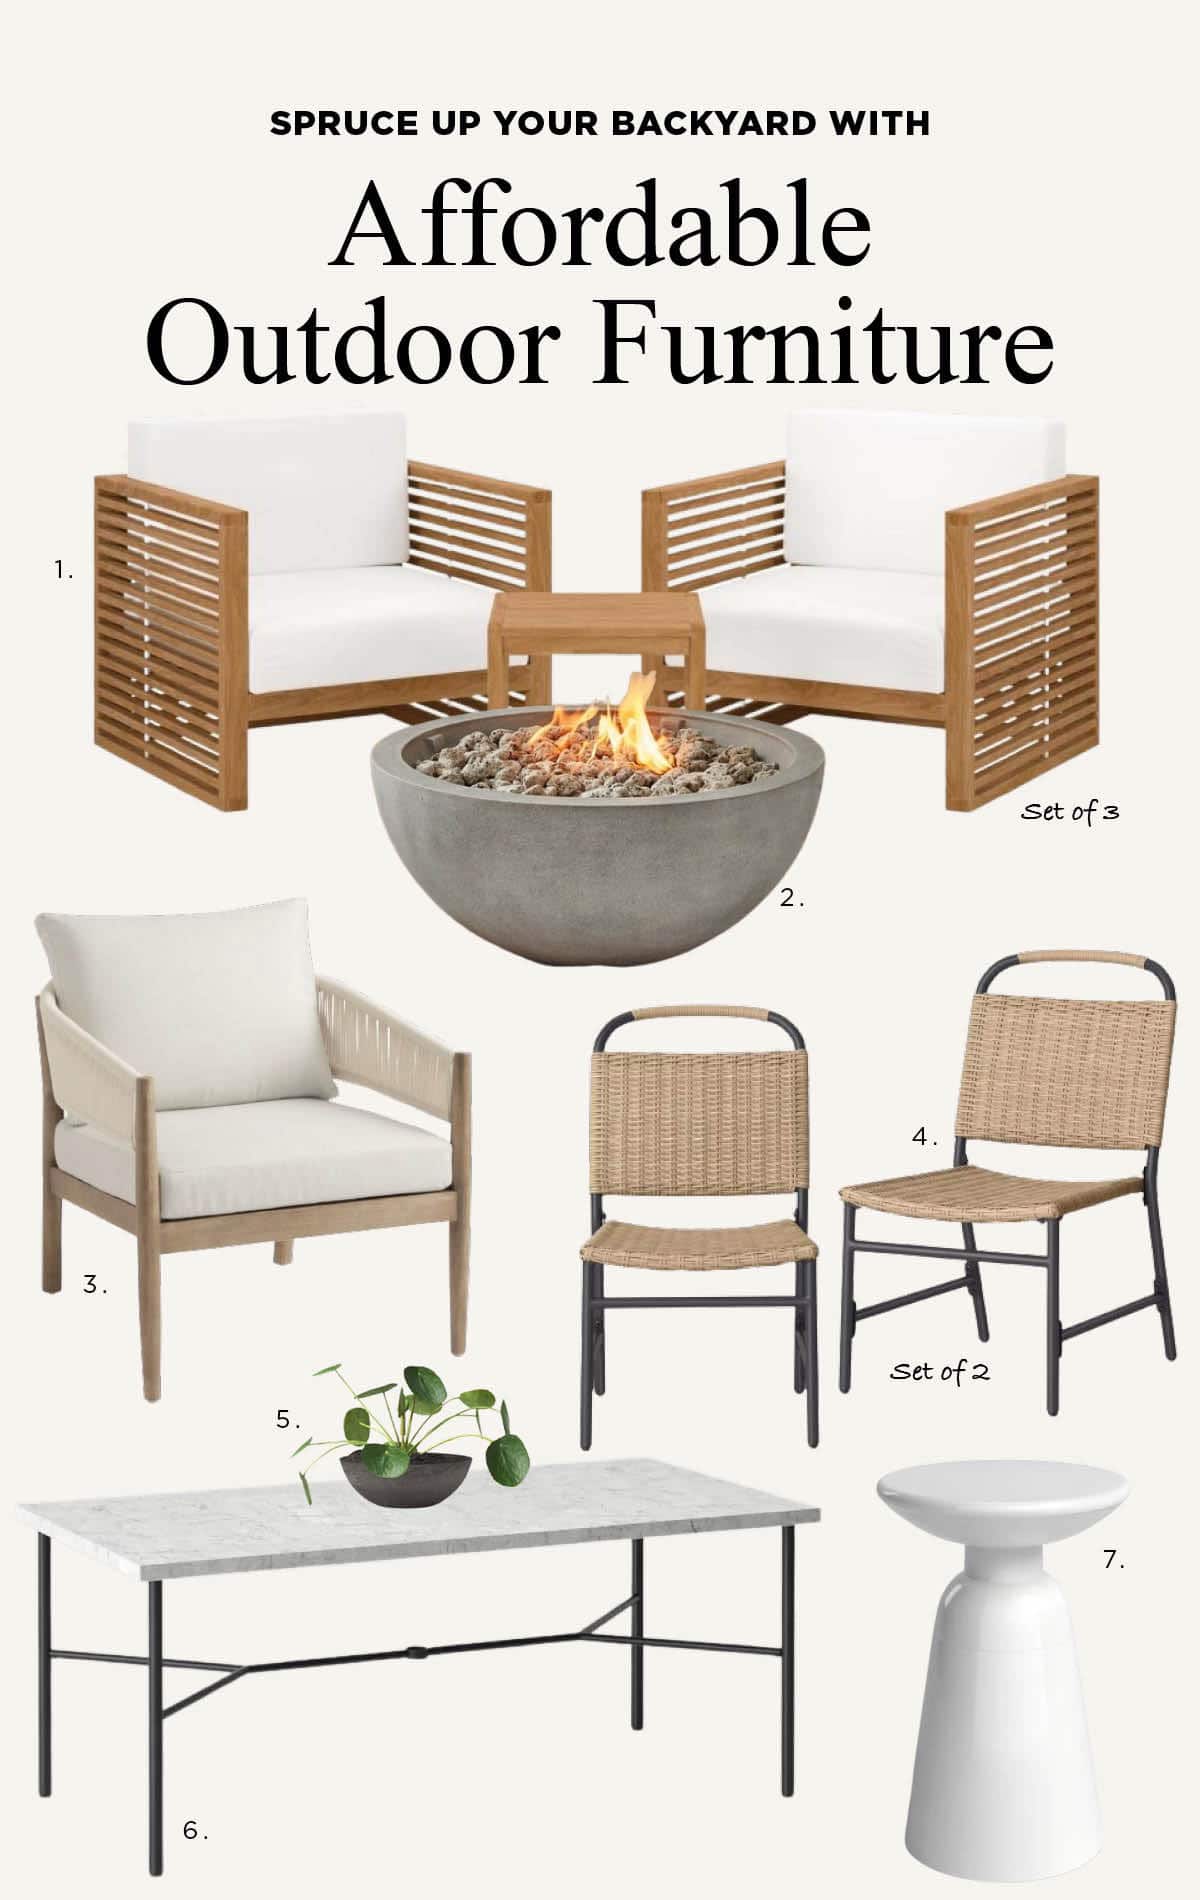 Affordable outdoor furniture comfy rocking chairs, modern fire pits, and a patio dining set